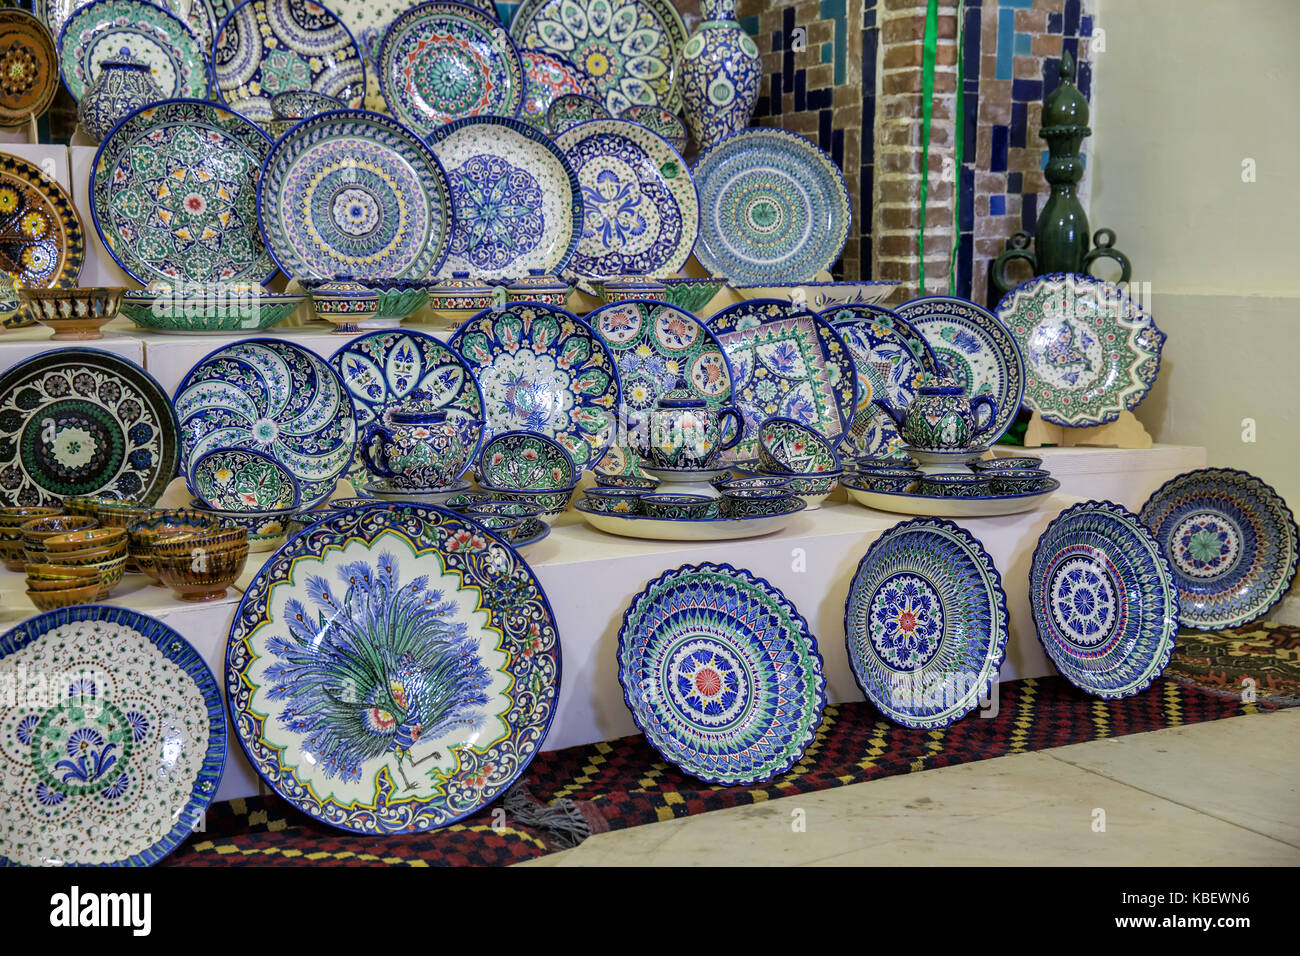 Sale of traditional Uzbek dishes in a souvenir shop at the Samarkand market Stock Photo